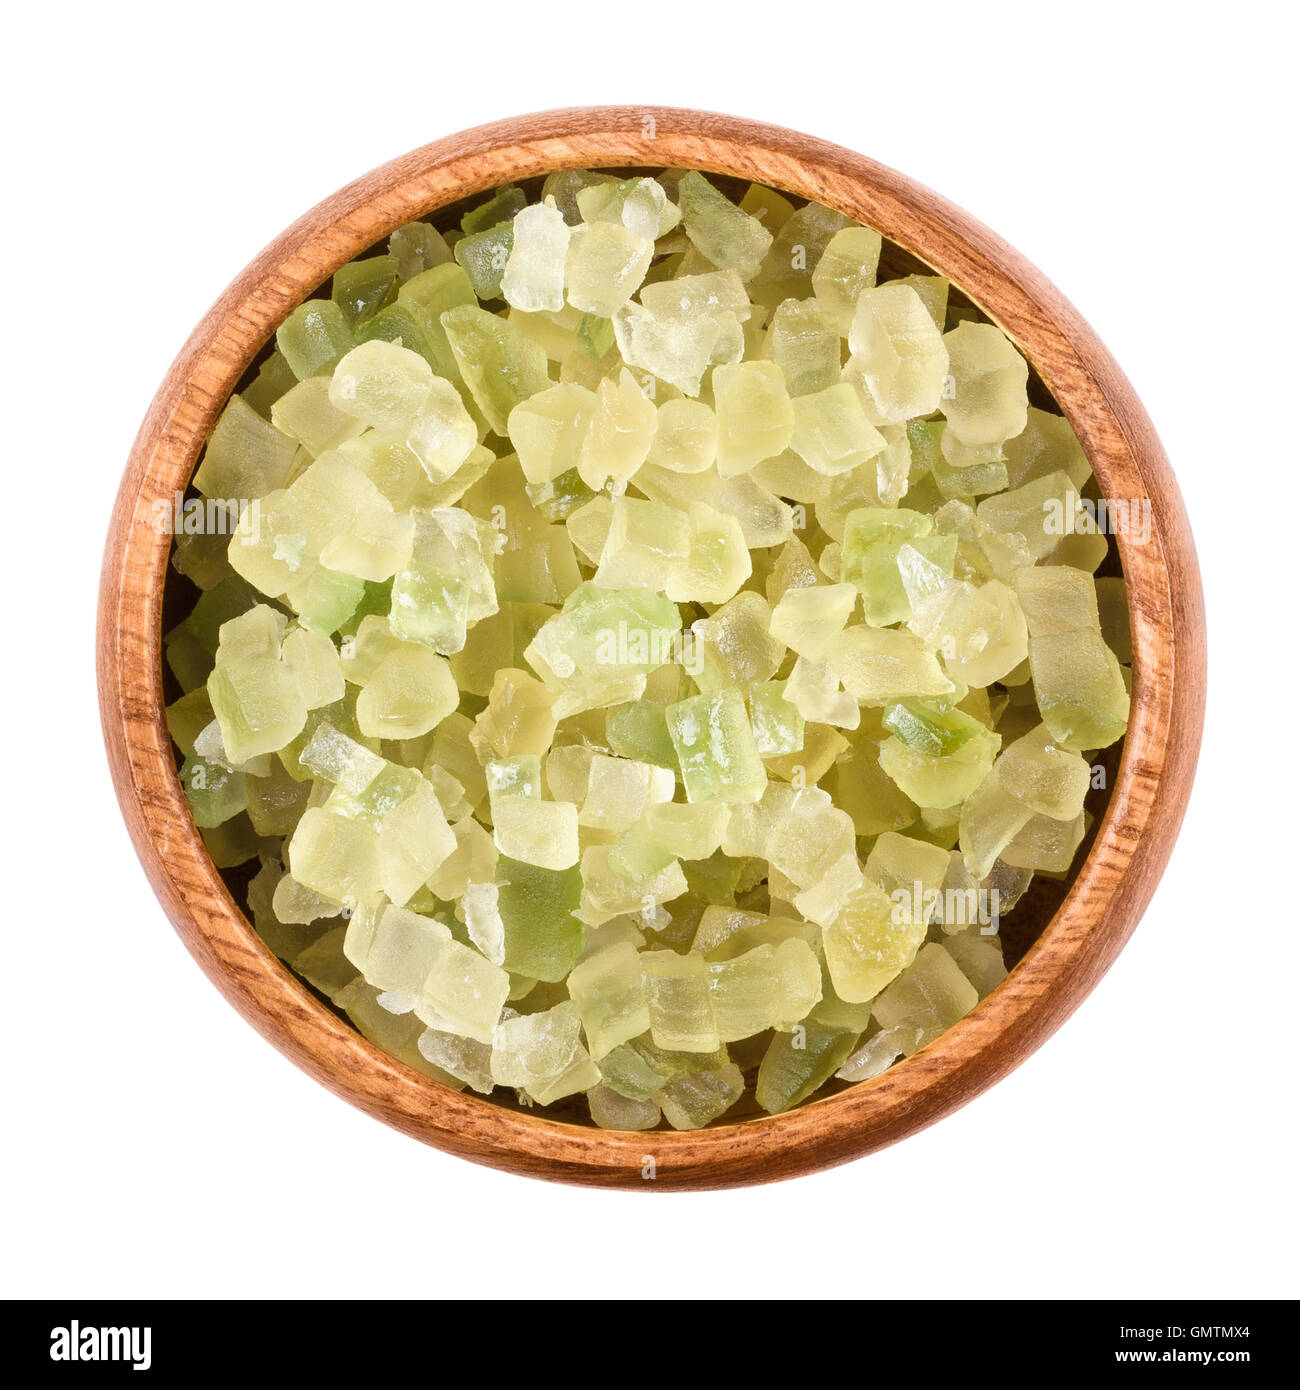 Diced green colored succade in a wooden bowl on white background. Candied peel of the citron fruit, Citrus medica. Stock Photo